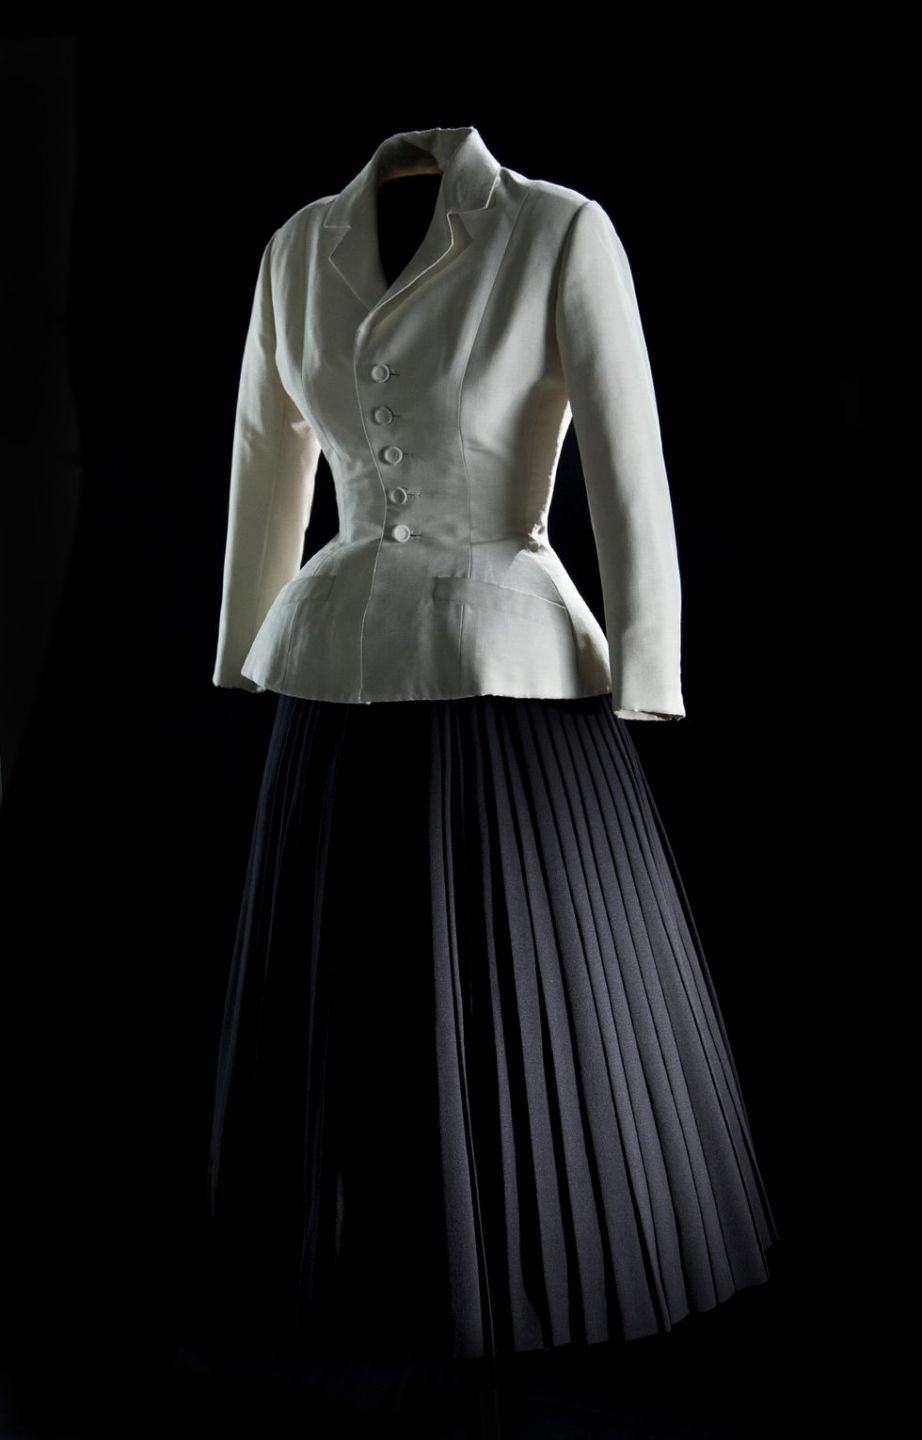 Dior's Iconic Bar Jacket Inspires Anew - The New York Times